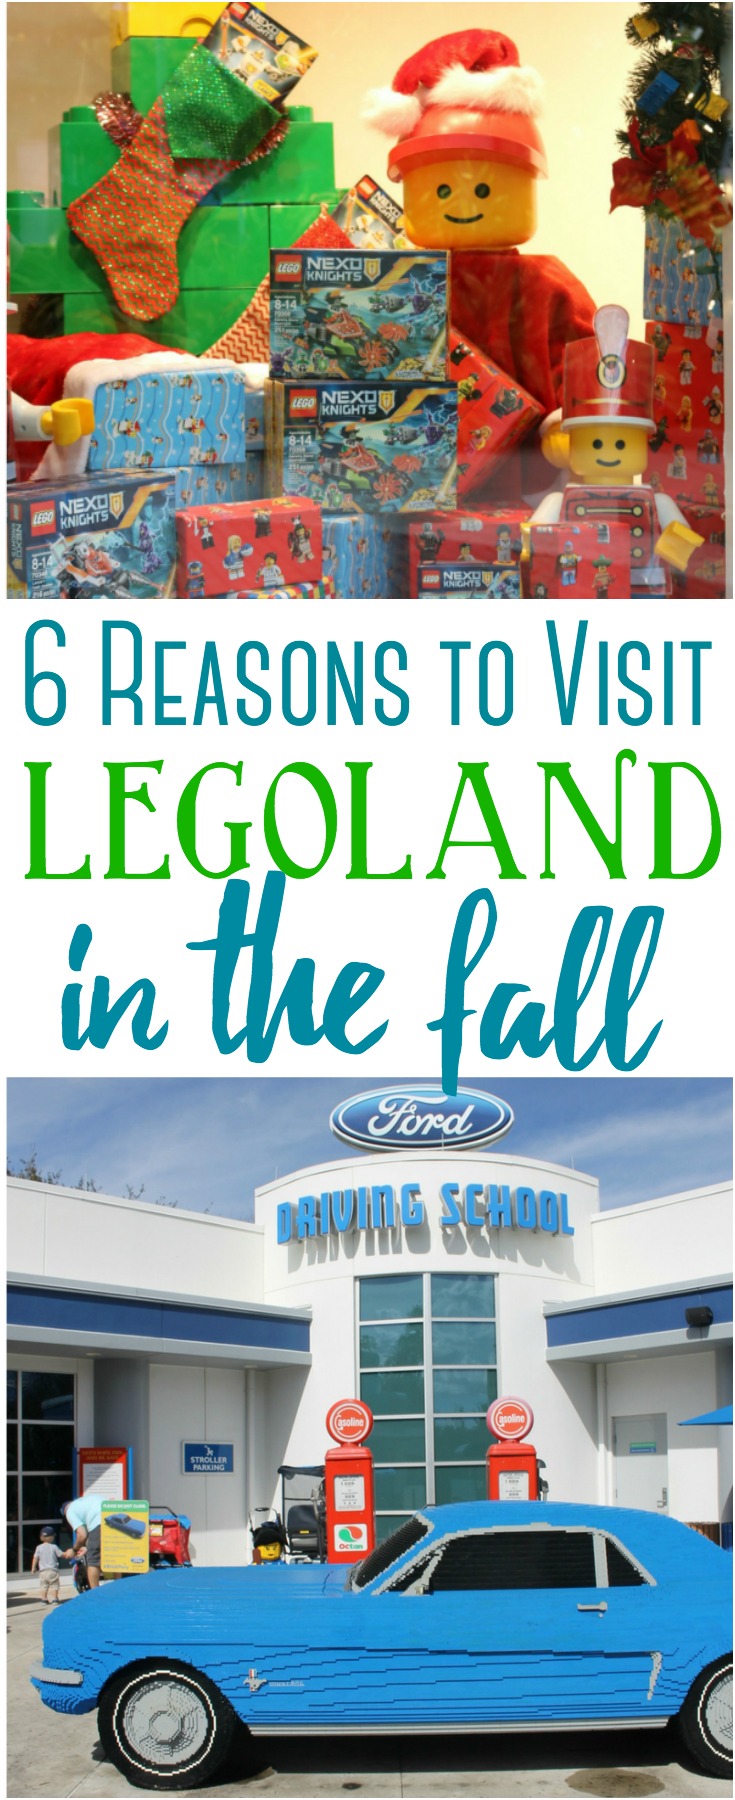 LEGOLAND is a popular tourist destination for families with small children. Here are 6 reasons you may want to visit LEGOLAND in the fall! 